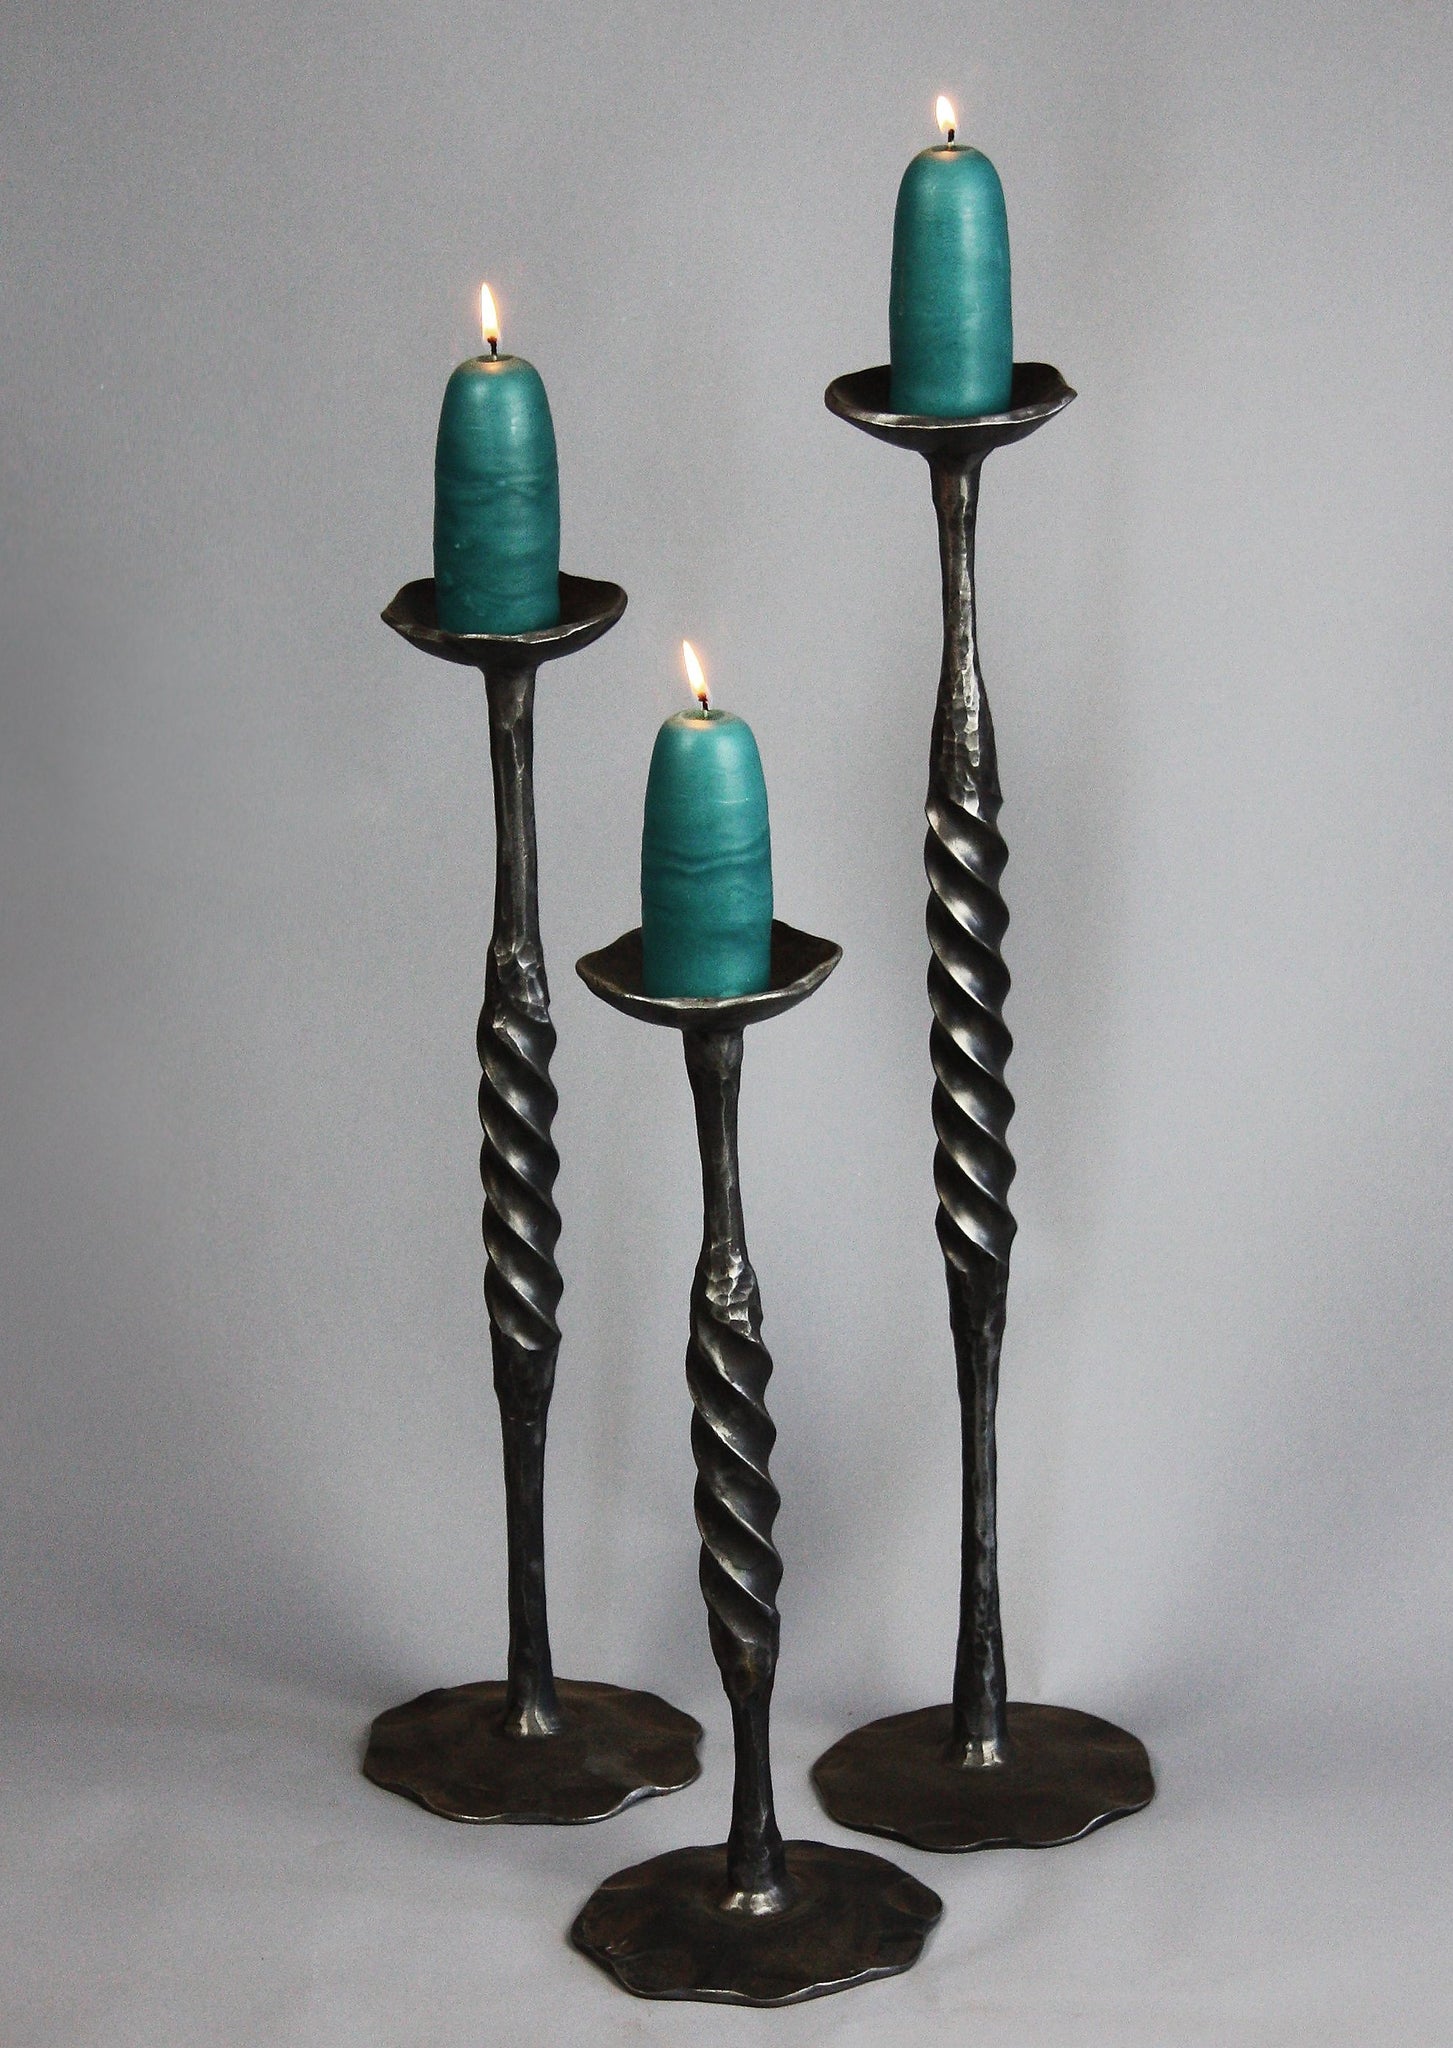 Three Pewter Black hand forged "Spiral Candlesticks" shown with large drip candles.